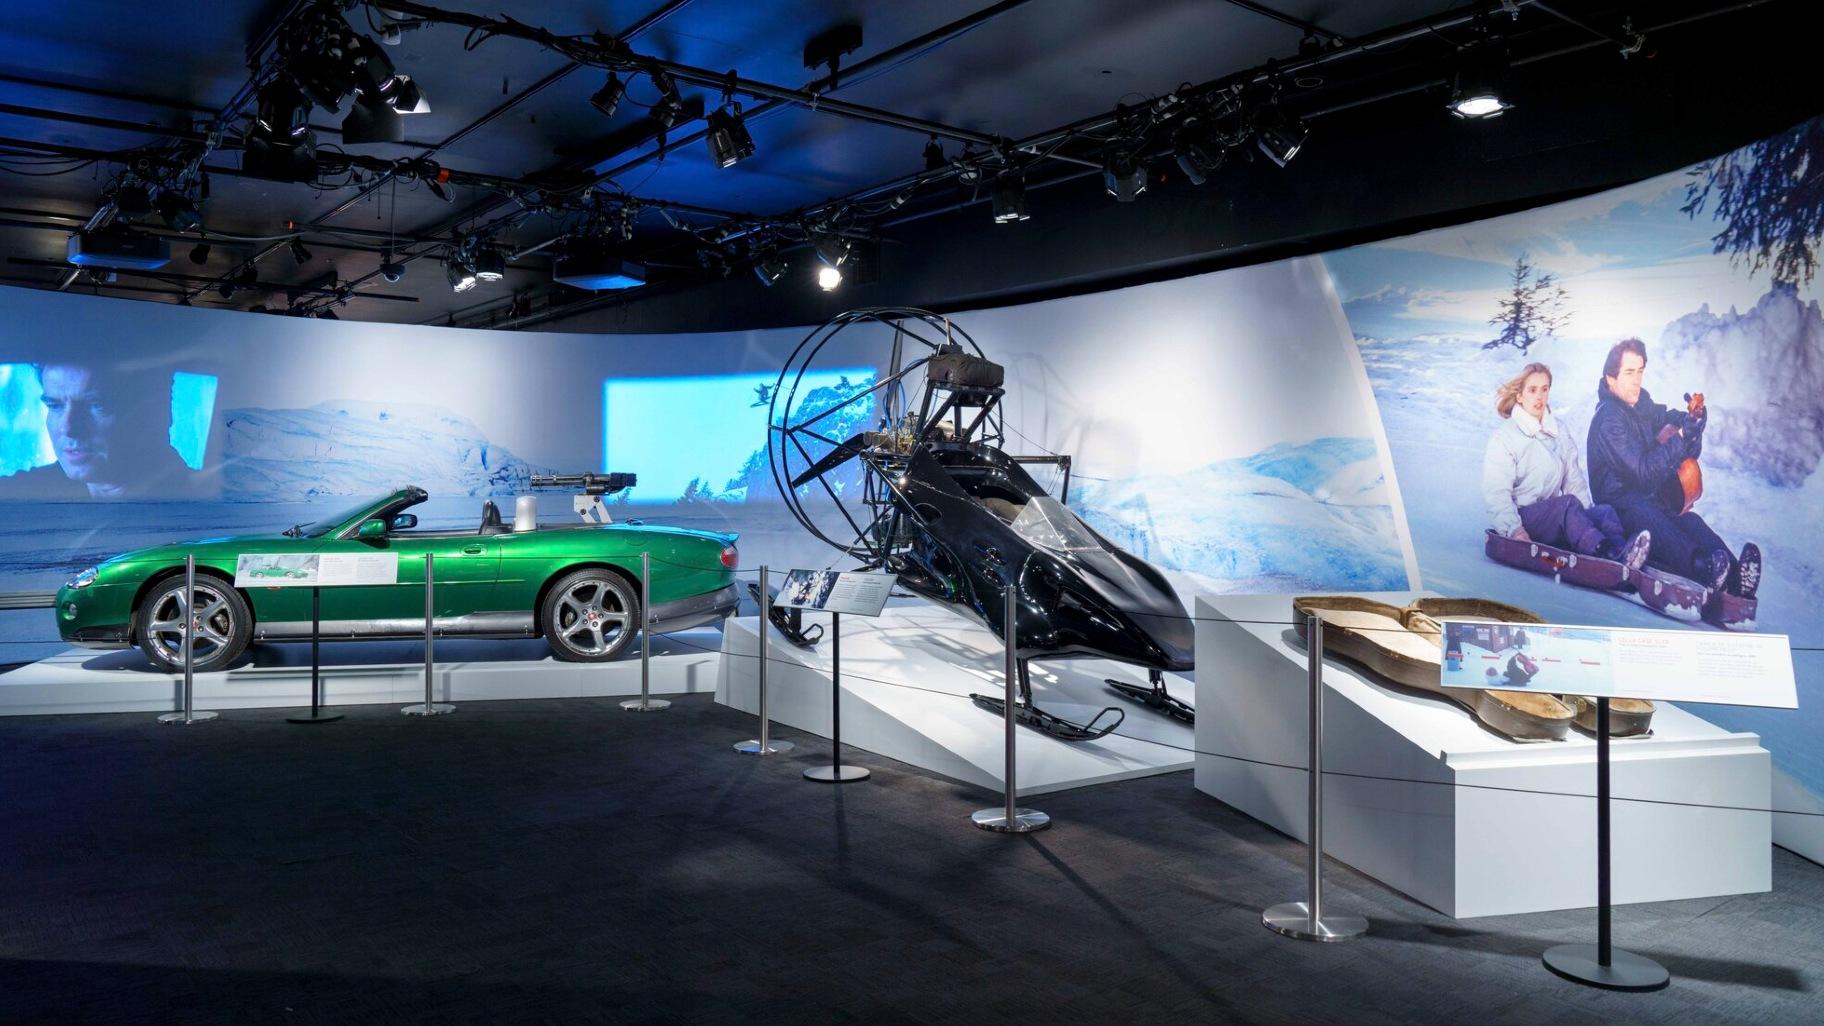 A look inside the “007 Science: Inventing the World of James Bond” exhibit at the Museum of Science and Industry. (Kelsey Ryan)